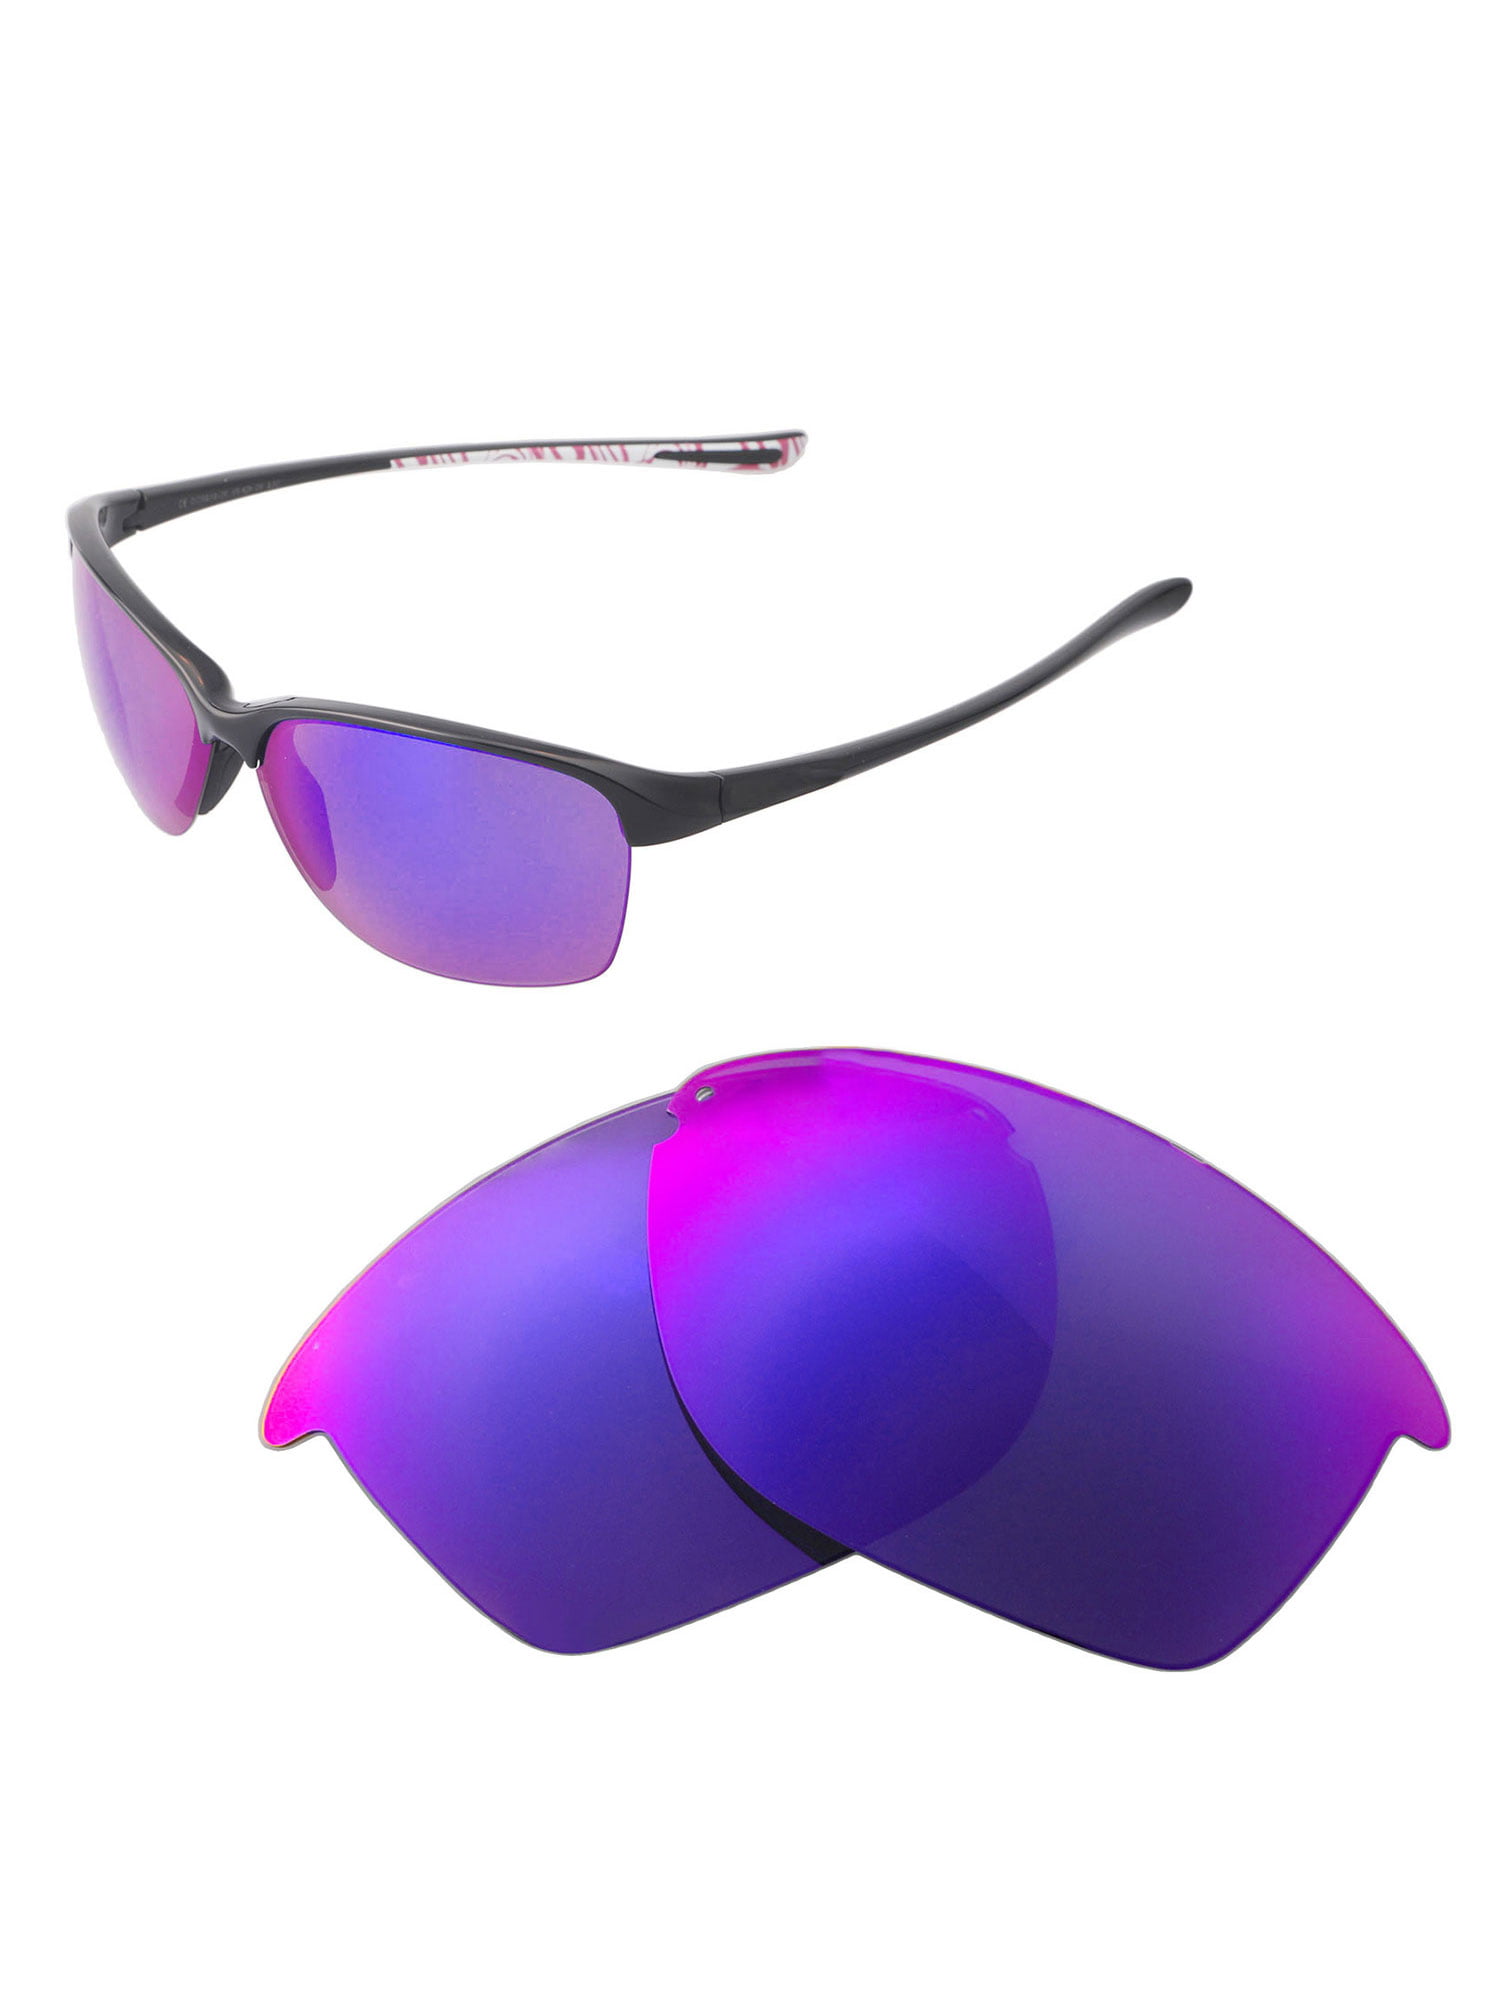 oakley be unstoppable sunglasses